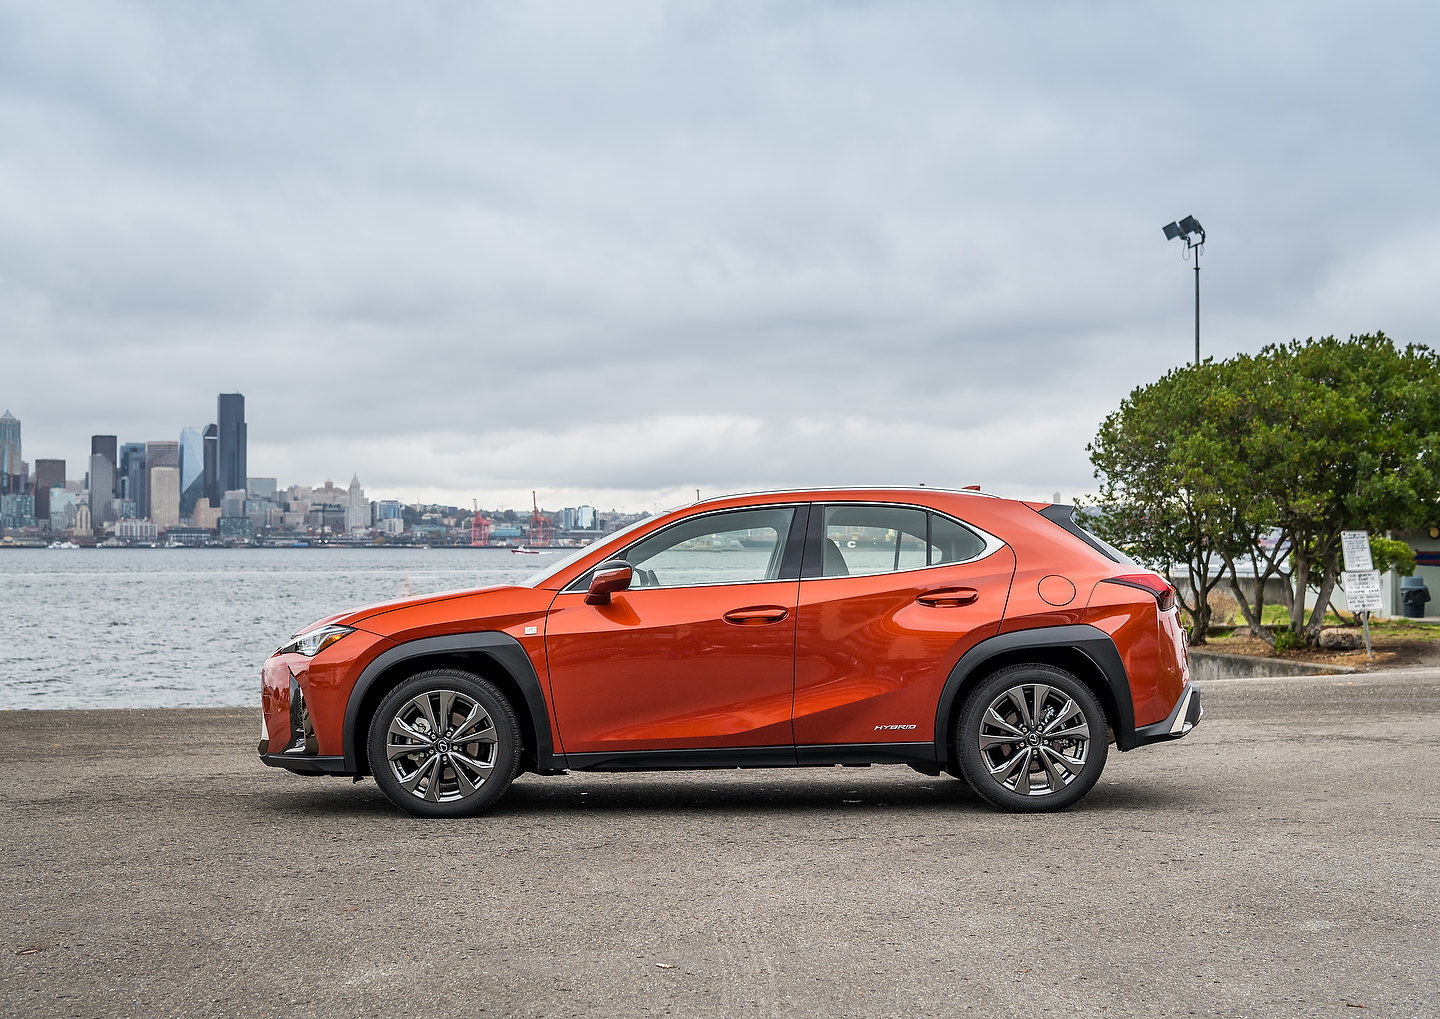 The 2019 Lexus UX: An Urban SUV to Discover